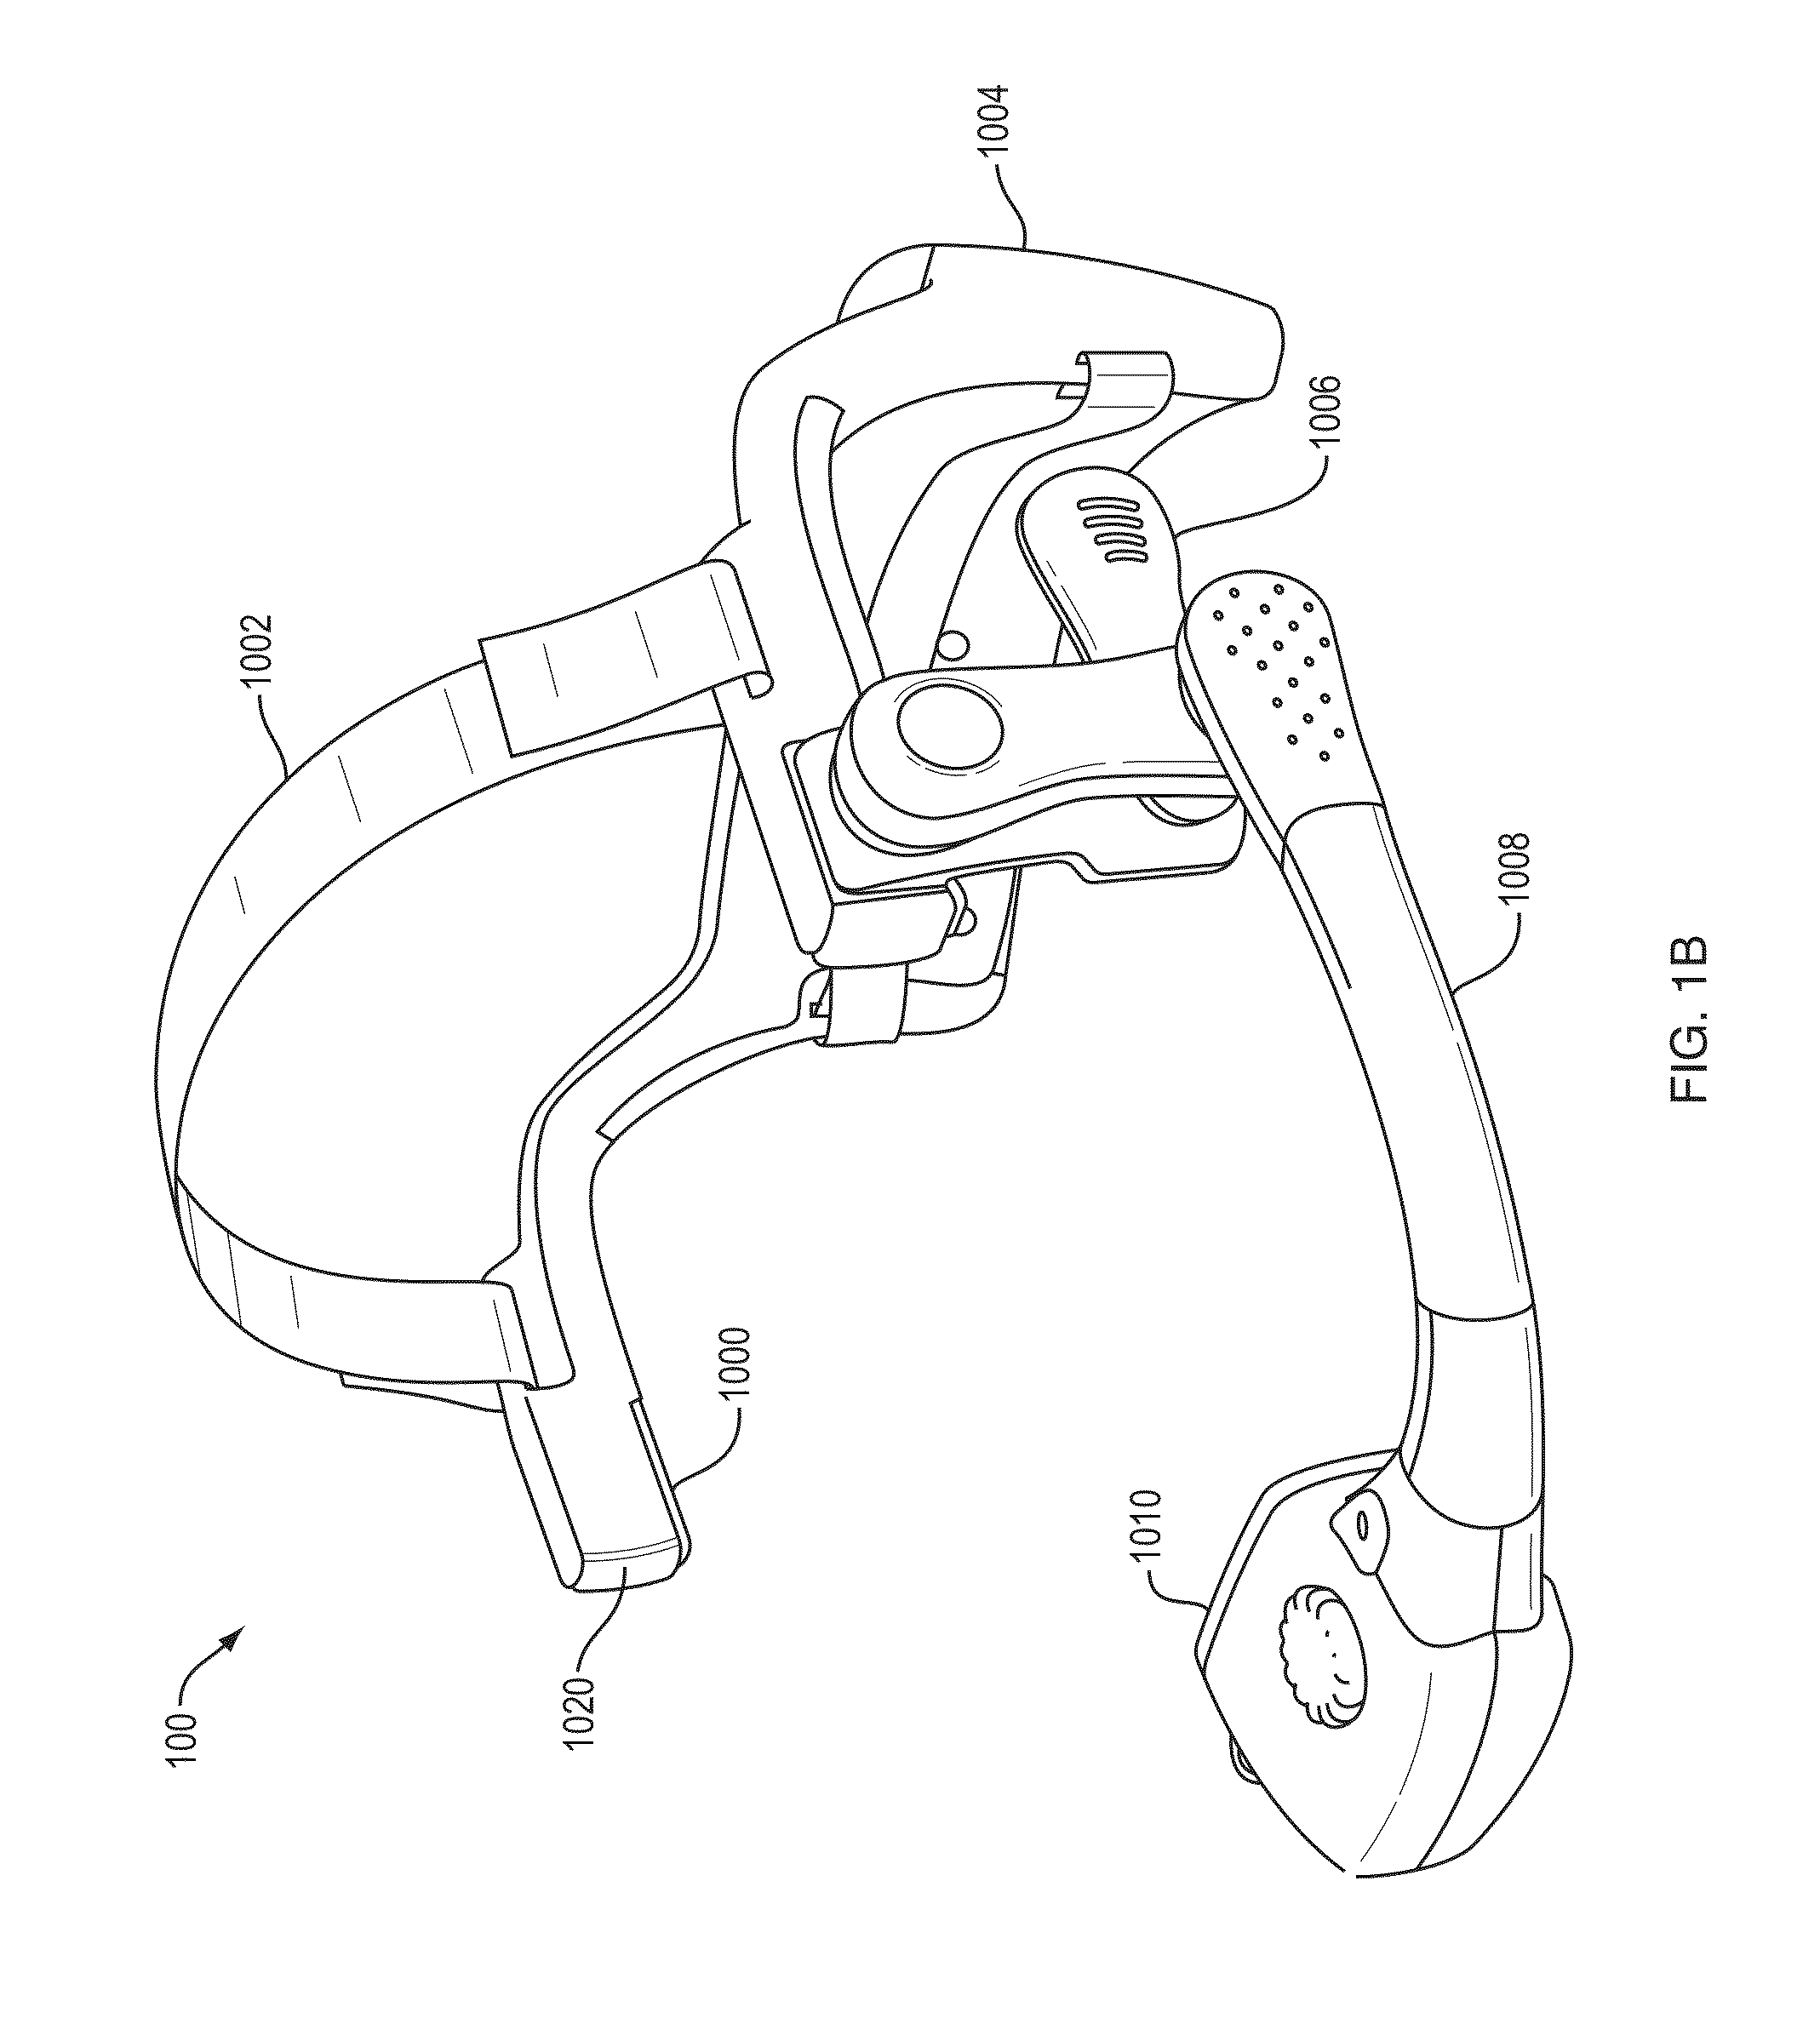 Headset computer with head tracking input used for inertial control